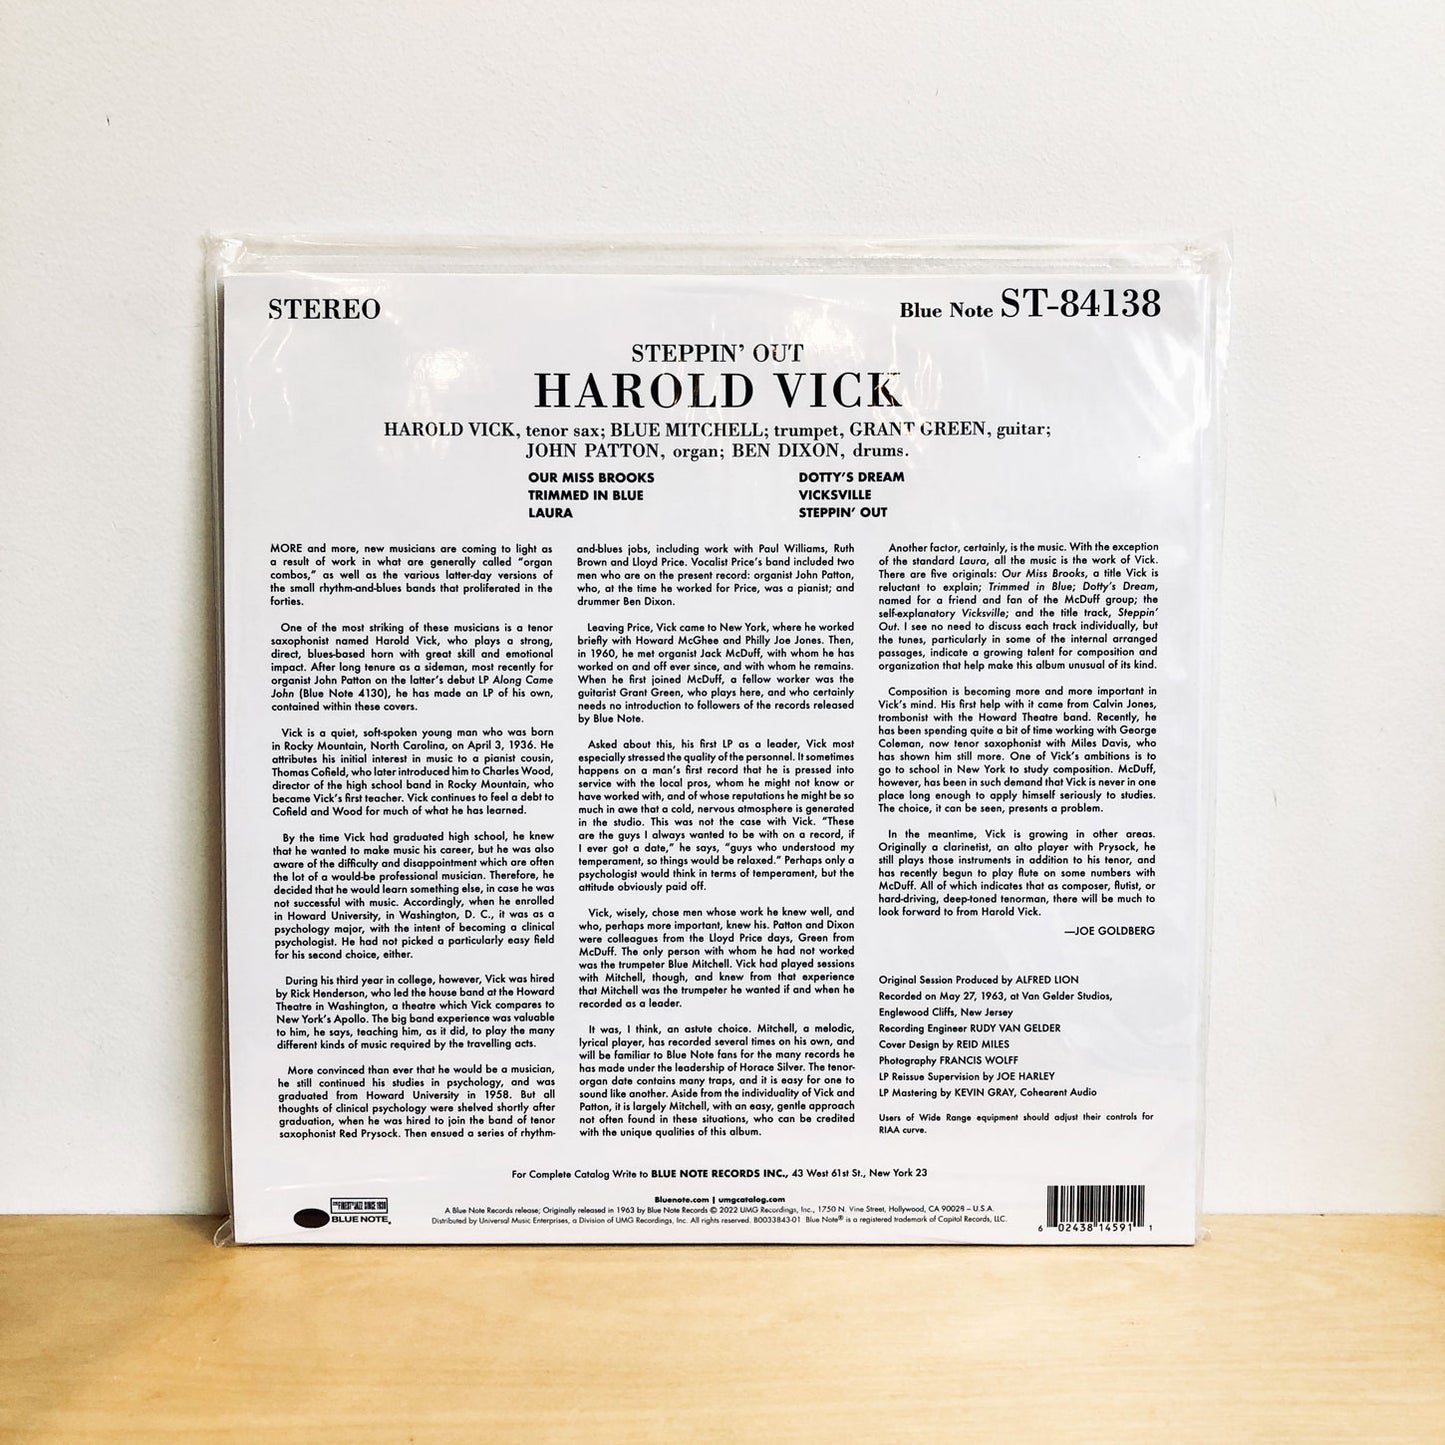 Harold Vick - Steppin' Out. LP (Blue Note Tone Poet Series) USA IMPORT